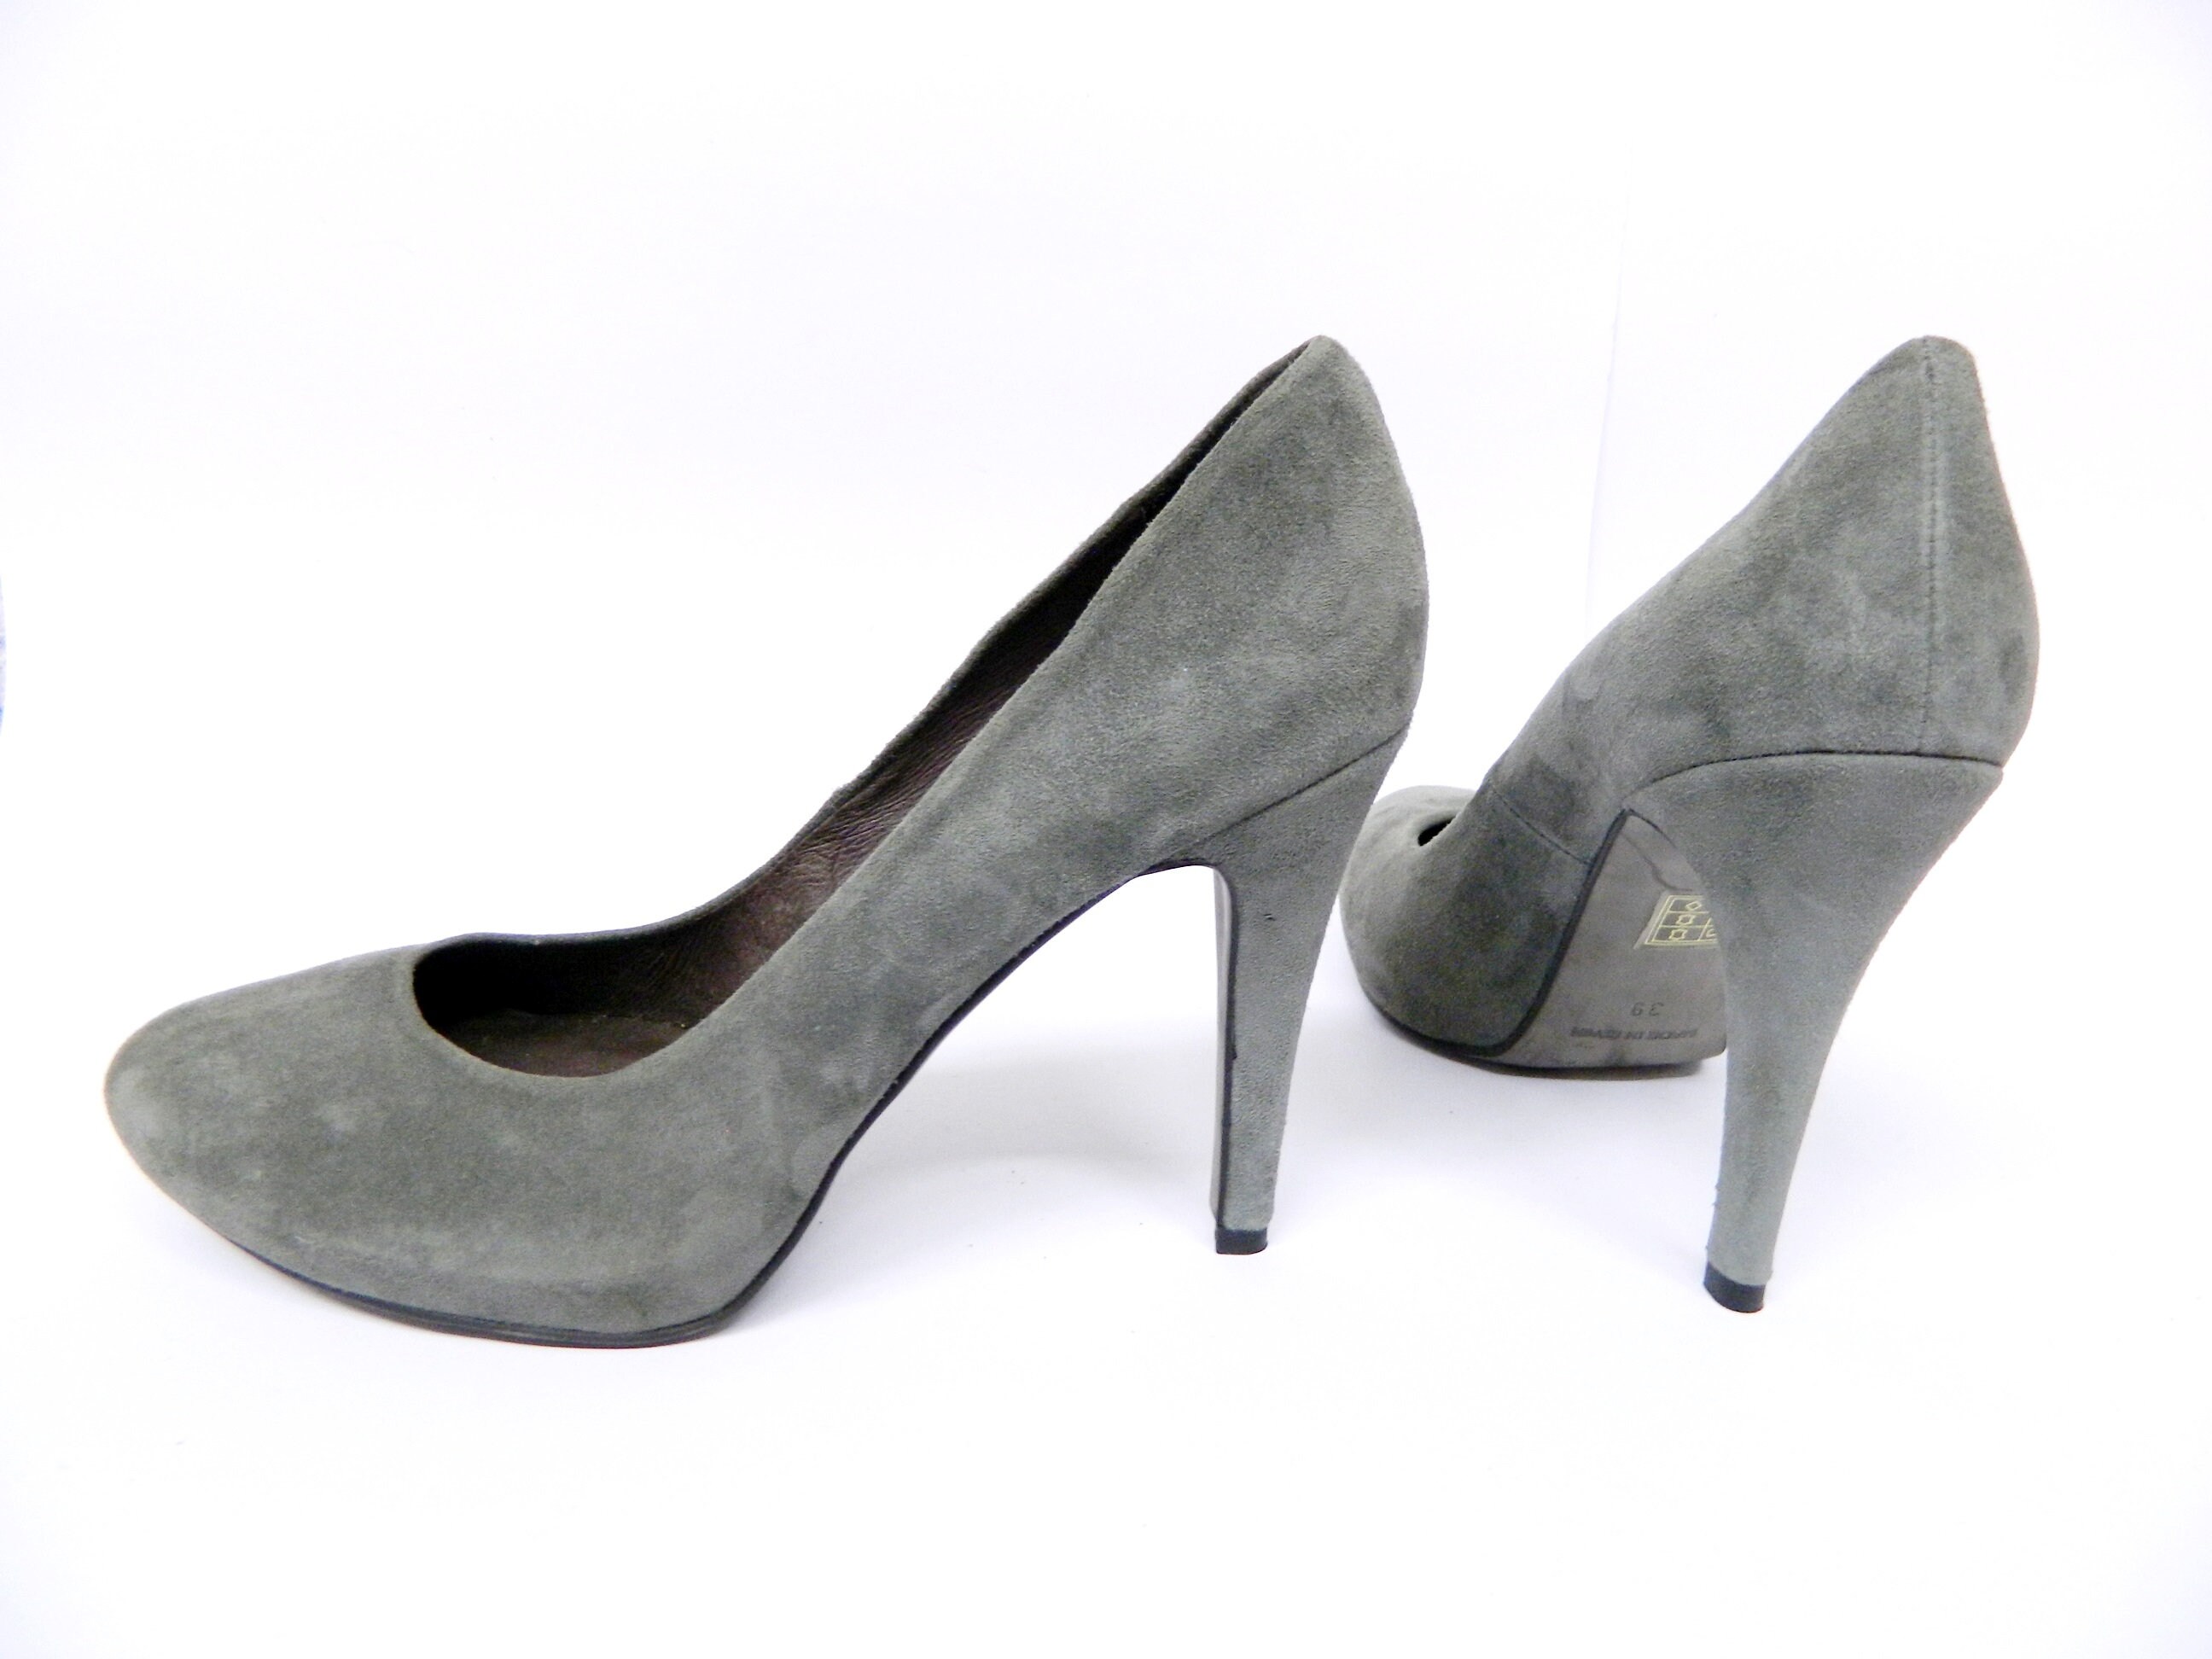 cousin Denmark Bad luck Suede Pumps 39 / High Heel Grey / Leather Pumps Si by Sinela / - Etsy